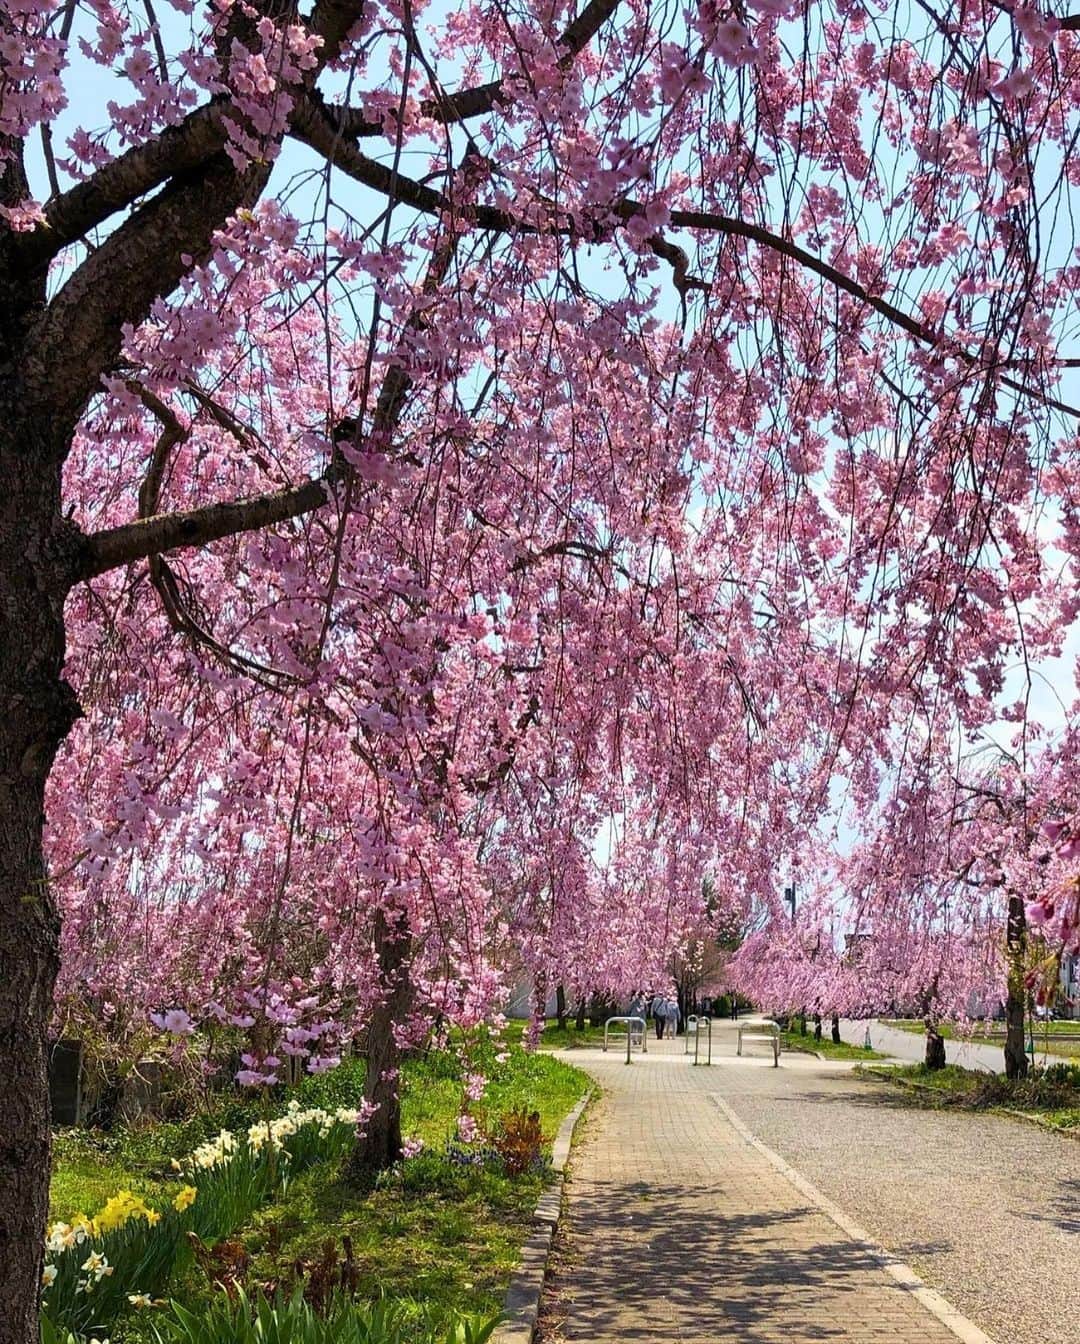 Rediscover Fukushimaさんのインスタグラム写真 - (Rediscover FukushimaInstagram)「Ready to swap your morning coffee for a bowl of ramen? 🍜  🌸The Nicchu Line Weeping Cherry Blossoms have started blooming in Kitakata City, Aizu region, Fukushima Prefecture, Japan…  …also known as the place where it’s normal to have ramen for breakfast! 🍜  A tradition called ’Asa-ra’ (朝ラ) in Japanese!  🍜Kitakata ramen is among the top 3 in Japan, and the city has +100 ramen restaurants  🍜Some restaurants open as early as 7 a.m. to serve ‘asa-ra’! 🍜Feeling like a burger instead? No worries, try Kitakata’s ramen burger! 😋  🧑‍🍳You can also try your hand at making your own Kitakata ramen, guided by an expert who had their own ramen restaurant (more information in our stories).  🚴Cycling is a great way to see the city! We have a post about cycling in Kitakata City (including where to rent bicycles!) on our website, so be sure to check it out.  This year’s dates:  Cherry Blossom Festival 🗓️April 7th-26th  Cherry Blossom Festival Opening 🗓️April 7th 🕰️10:00  Cherry Blossom Light-up 🗓️April 8th-17th 🕰️18:30-20:00  Would you like to visit the Nicchu Line Weeping Cherry Blossoms? 🤩  Save this post for your next visit! 🔖  #visitfukushima #fukushima #cherryblossom #japantravel #japaneseramen #weepingcherryblossoms #kitakata #kitakataramen #ramen #ramenlovers #historicaltown #historylovers #japaneseramen #nicchuline #kitakatacity #aizu #japanapriltrip #tohoku #jrpass #jreastpasstohoku #sakura #hanami #spring #springinjapan #beautiful #beautifulplaces #beautifuldestinations #beautifuljapan #japanese」4月5日 17時06分 - rediscoverfukushima